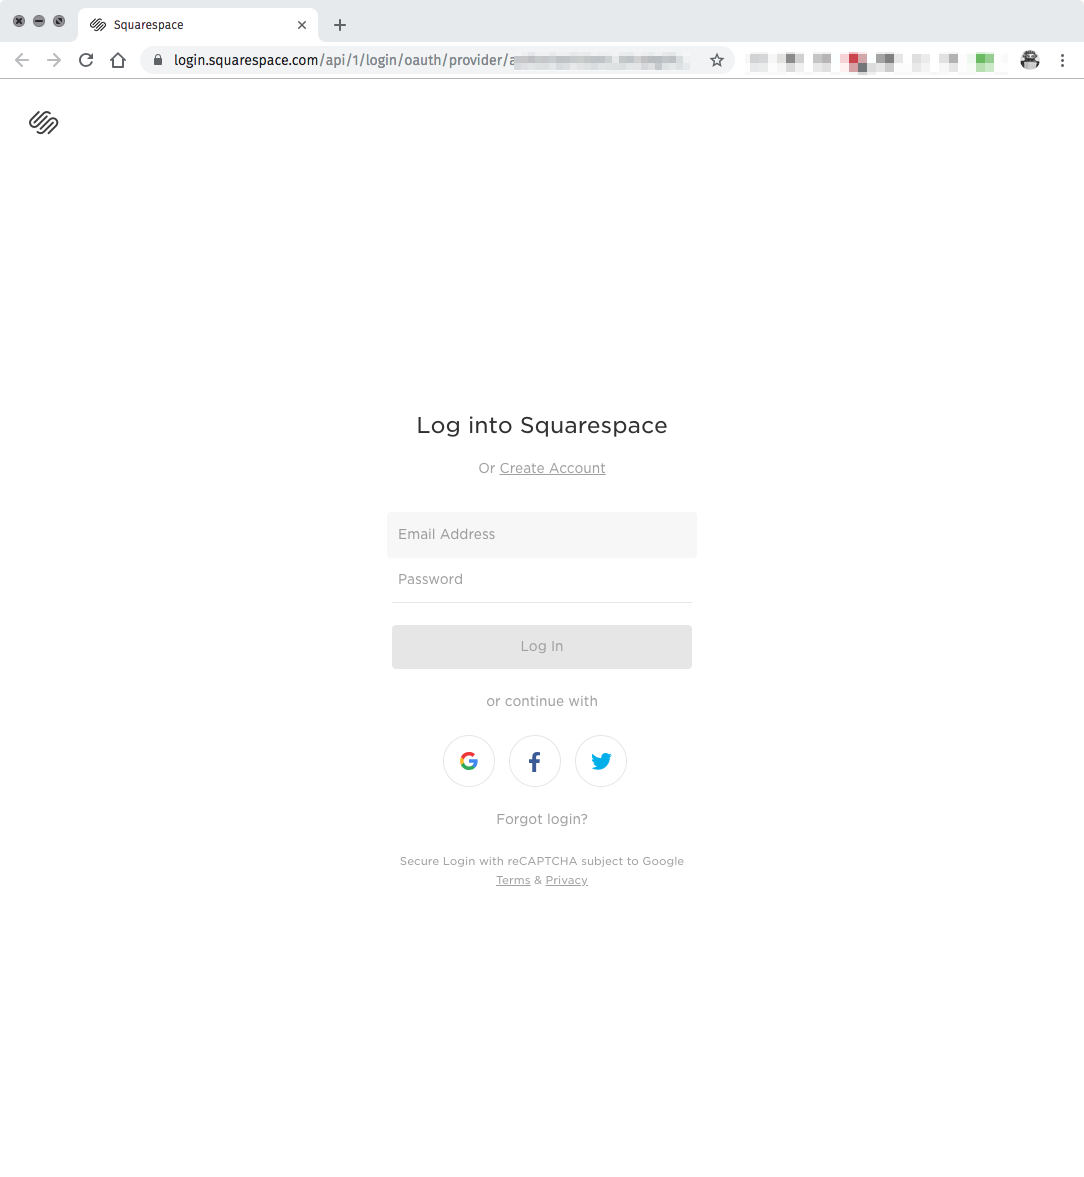 Squarespace chat support